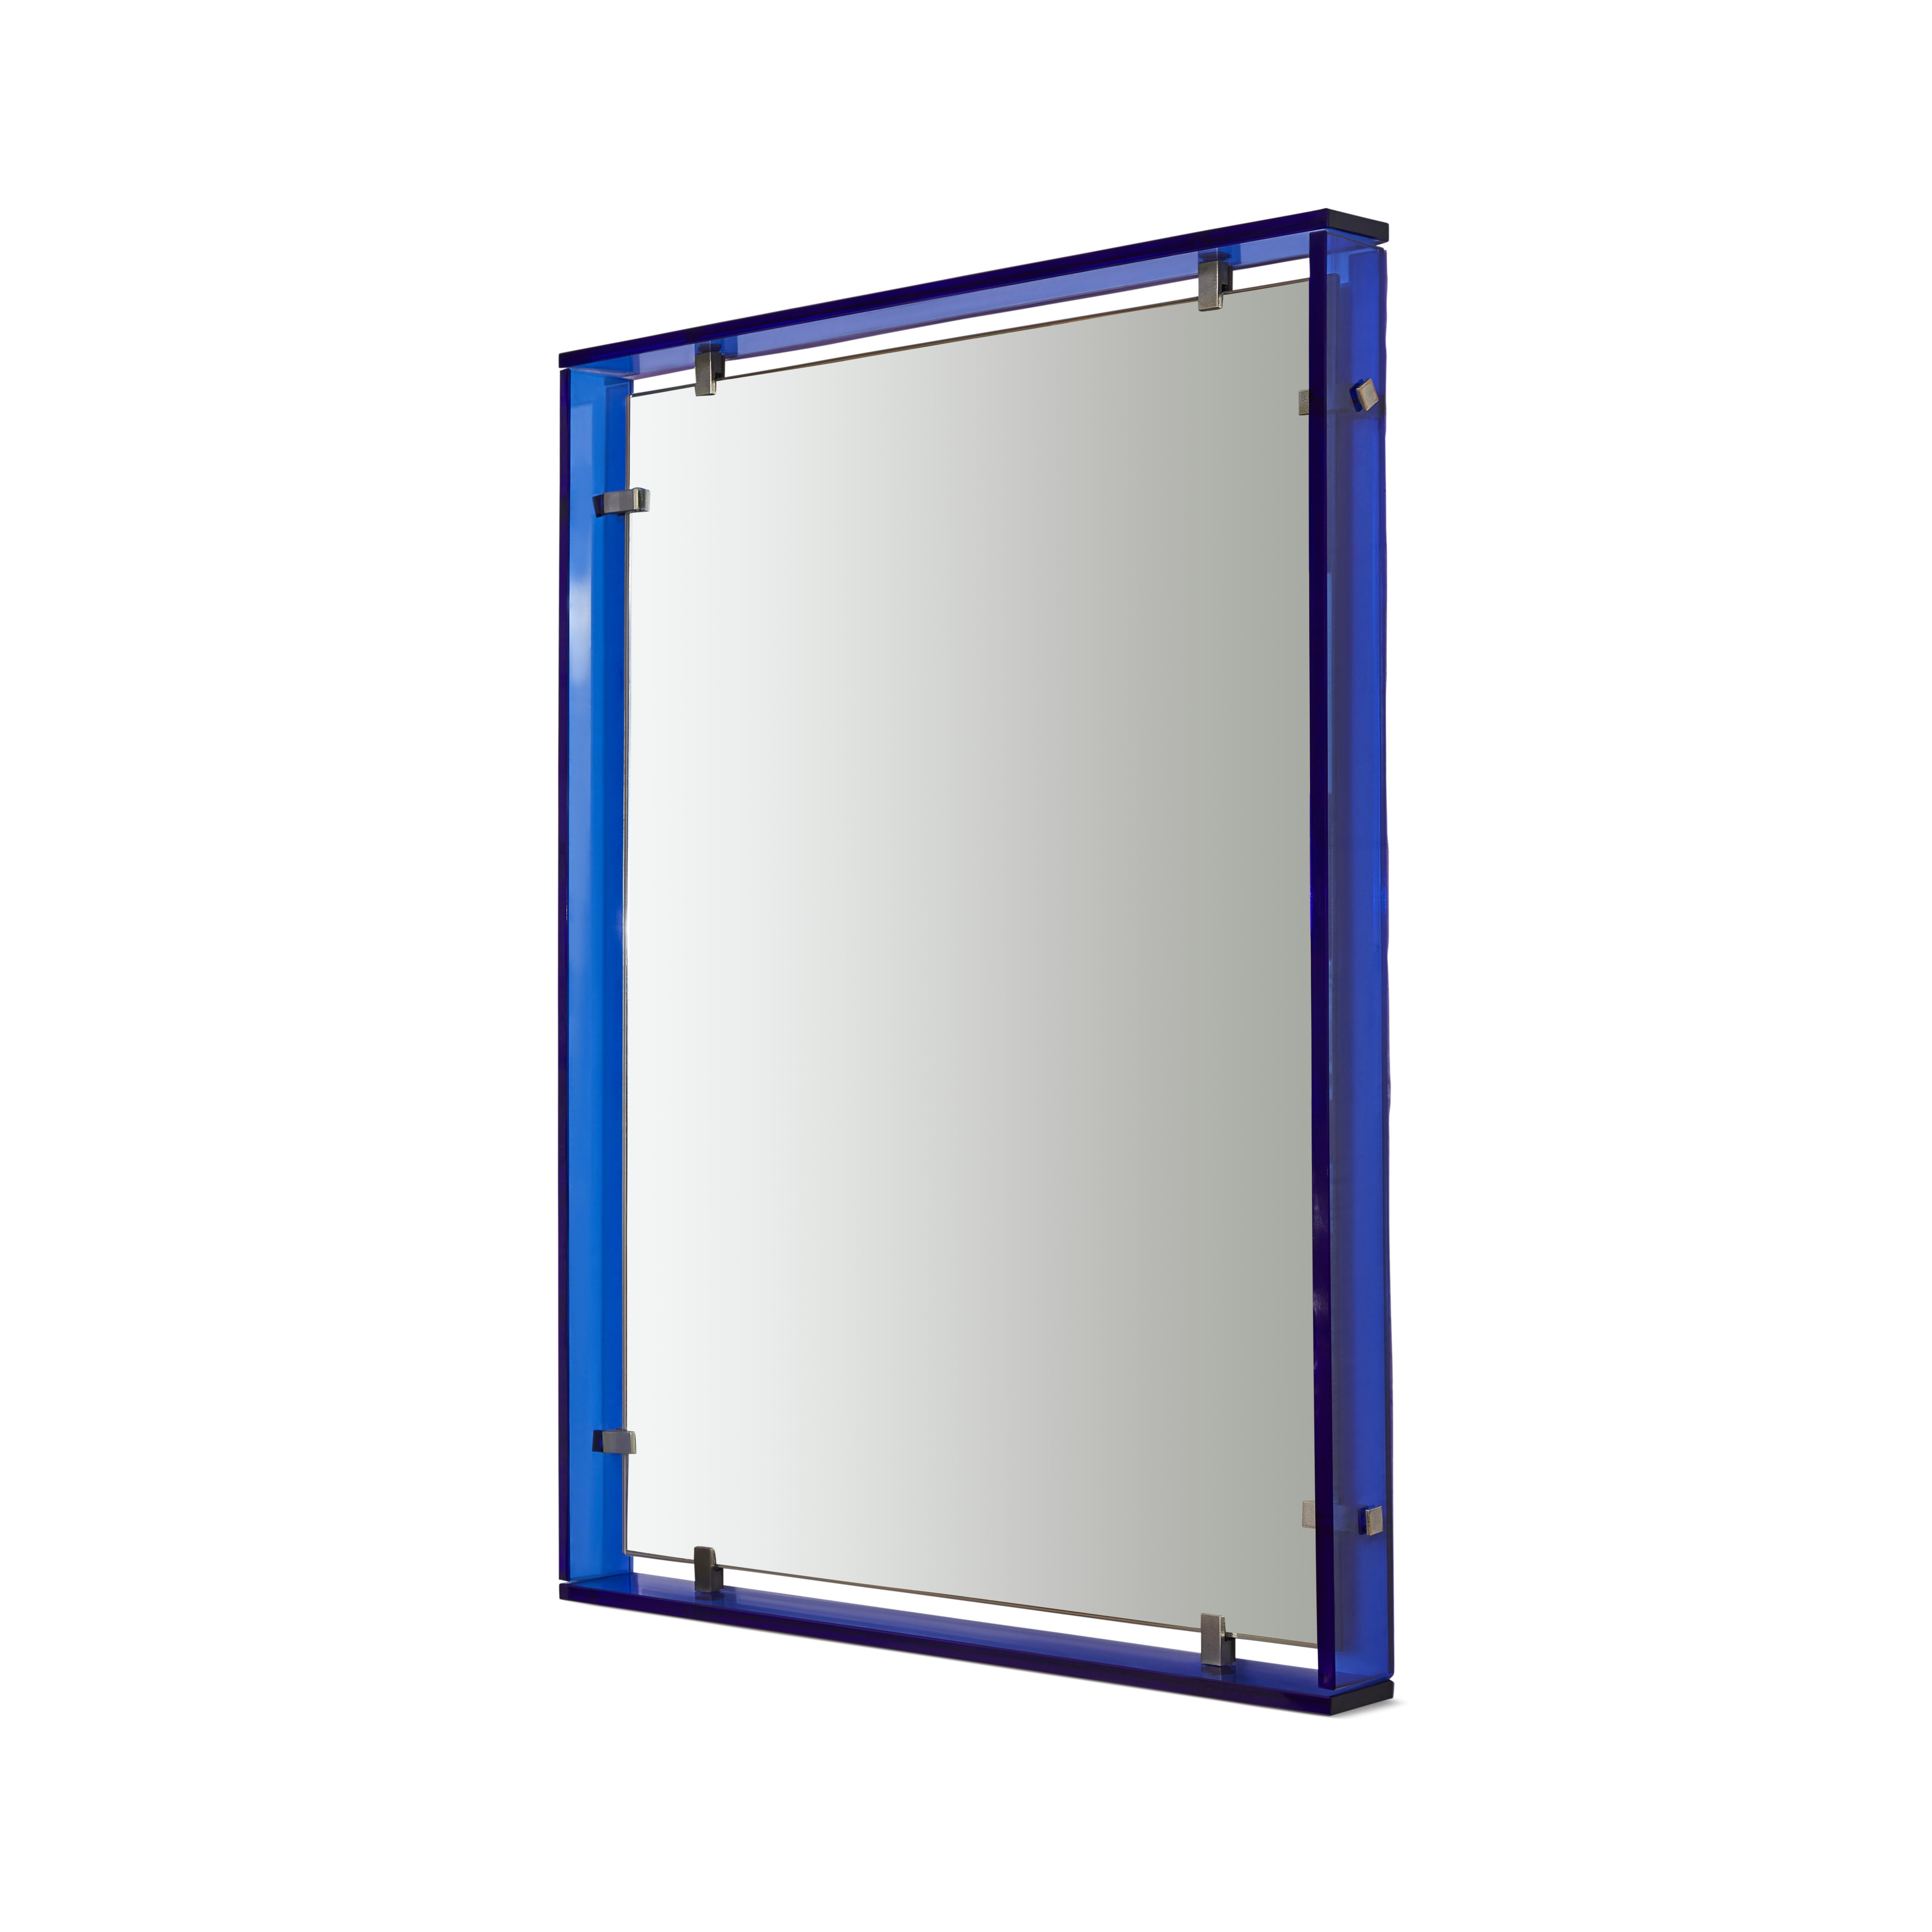 Fine quality mirror, Model 2014 designed by Max Ingrand for Fontana Arte. There is a floating mirror with striking cobalt blue glass surround and fixings in heavy nickeled brass. This is a mirror of the highest quality and originality.Production of